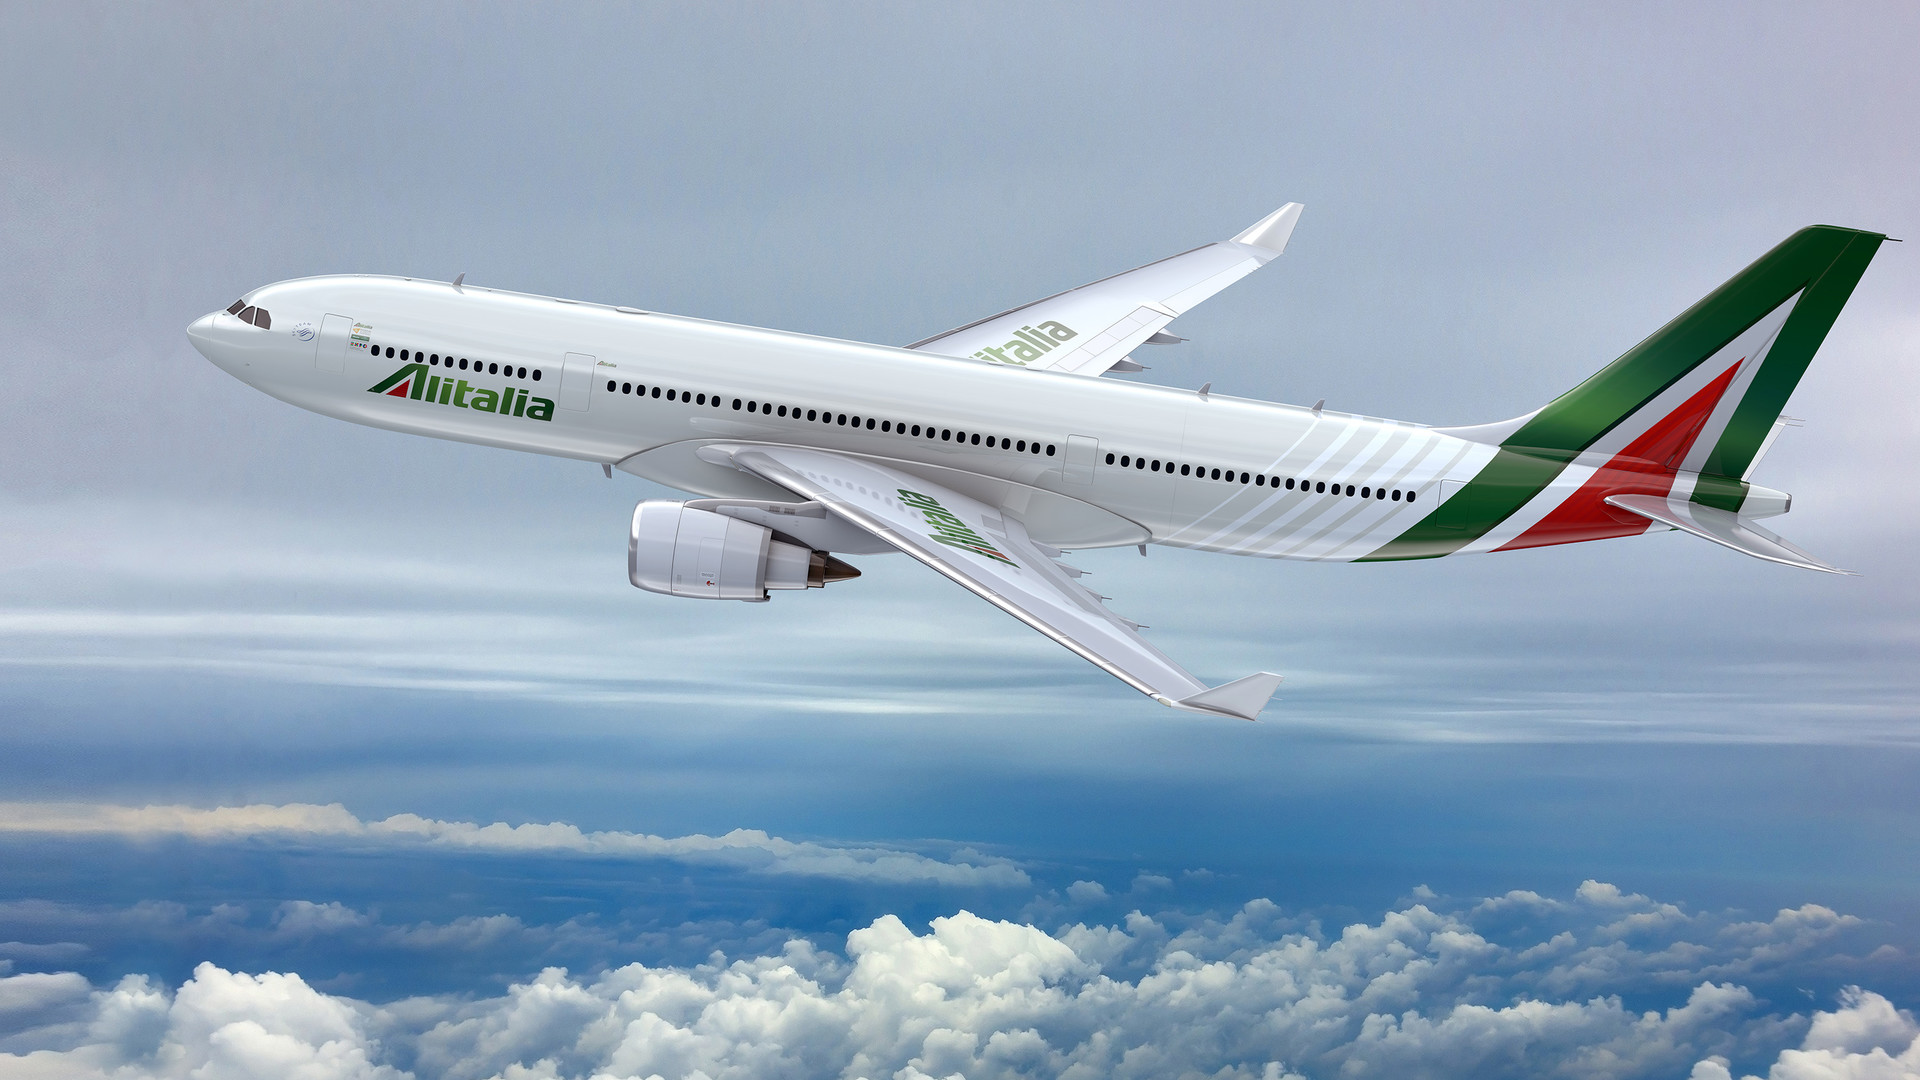 Alitalia | book our flights online & save | low-fares, offers & more